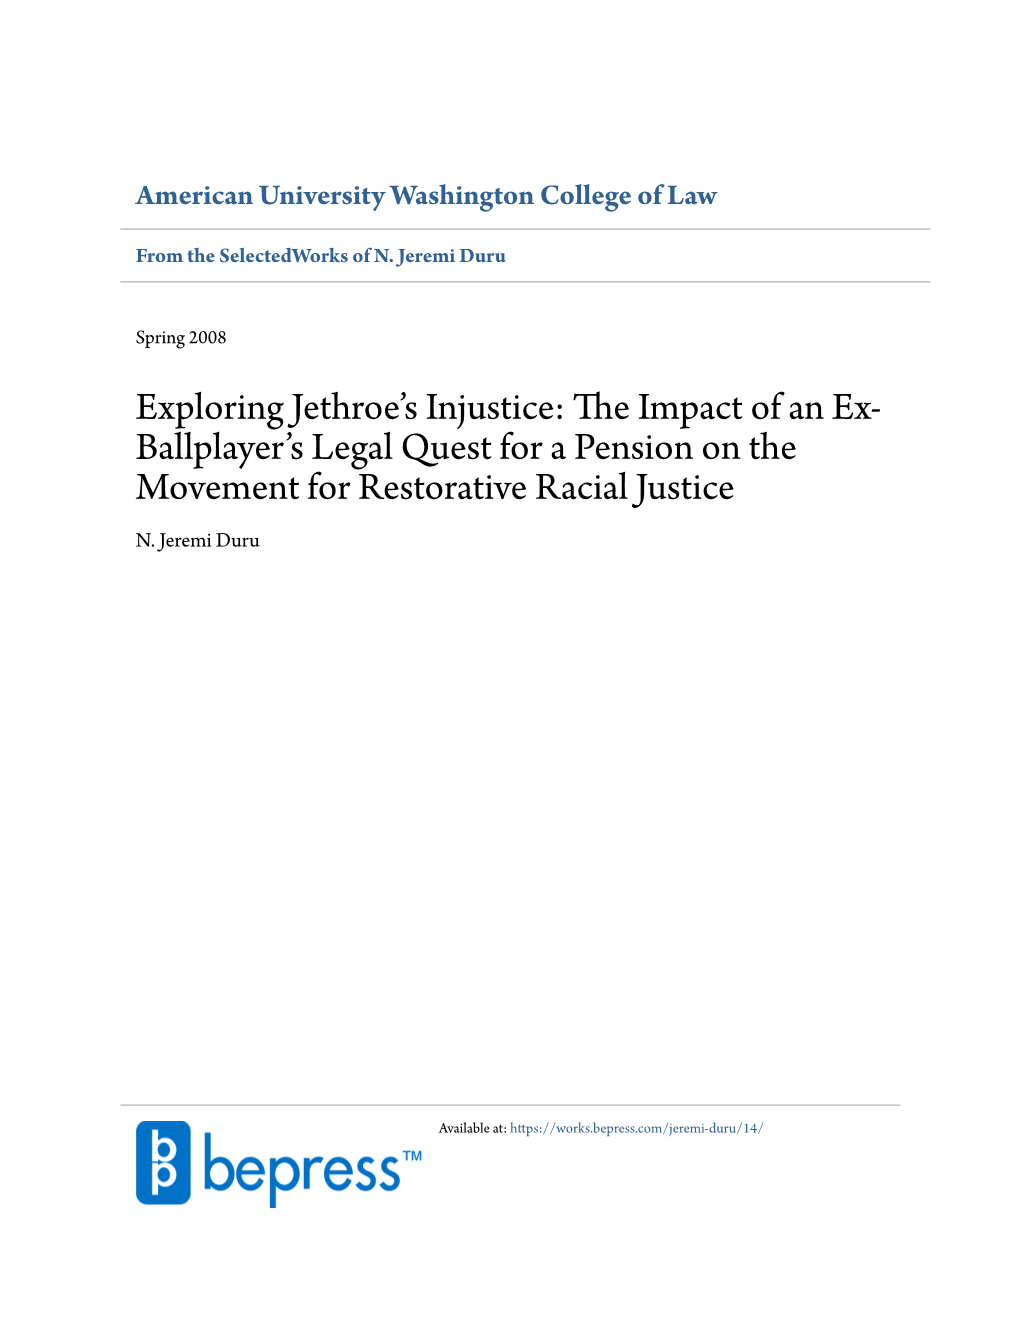 Exploring Jethroe's Injustice: the Impact of an Ex-Ballplayer's Legal Quest for a Pension on the Movement for Restorative Racial Justice